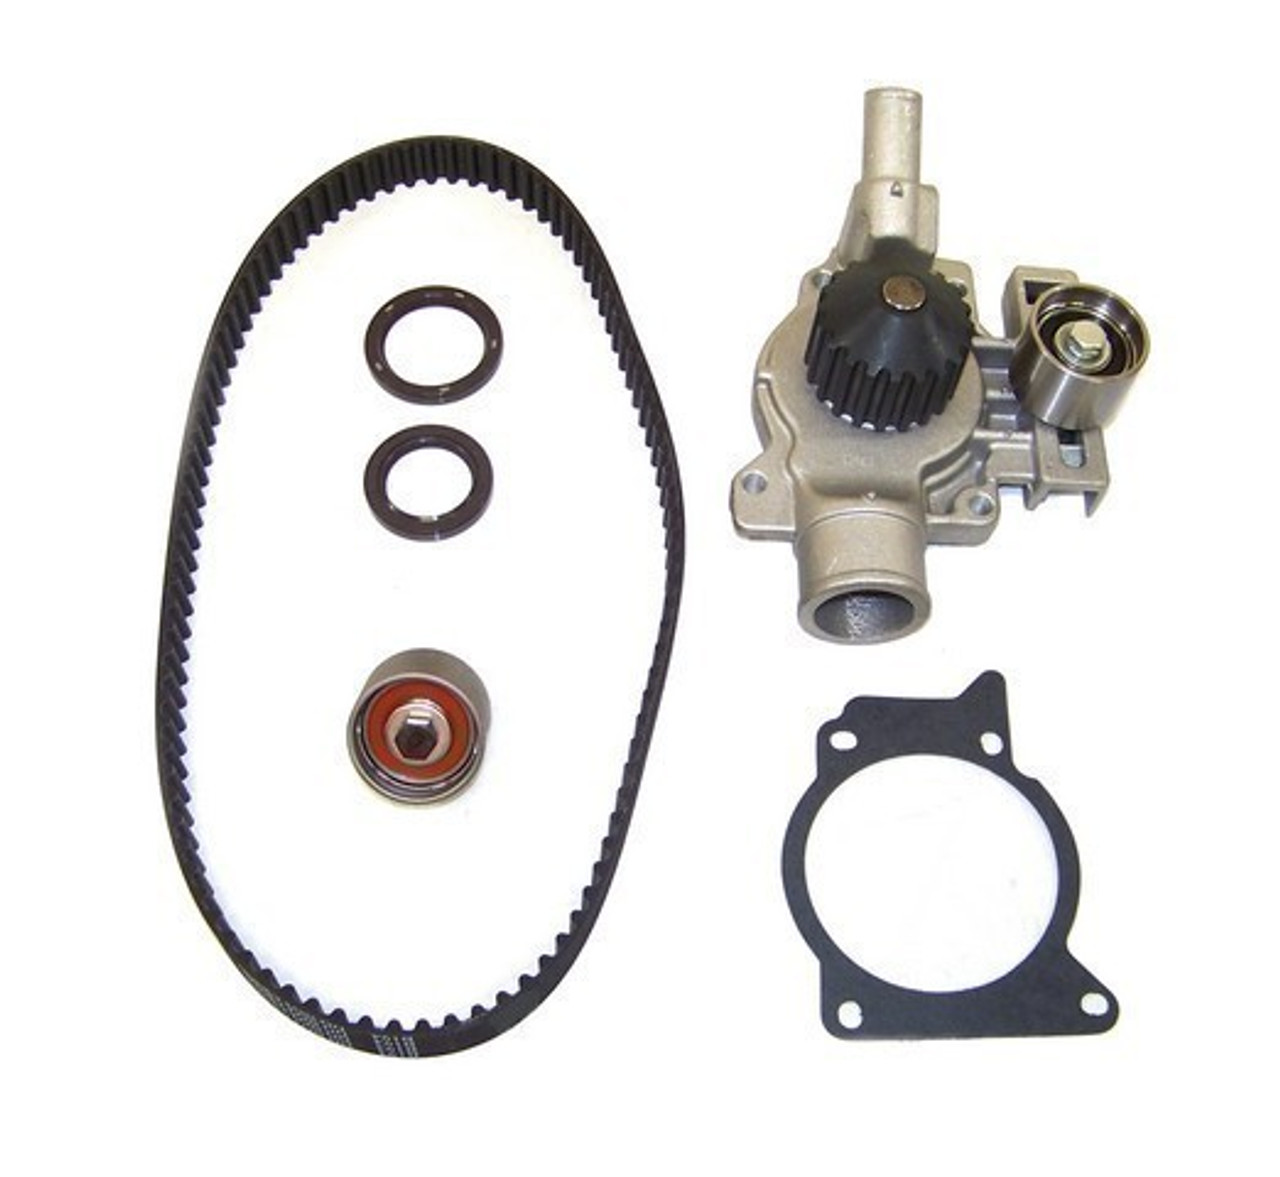 1996 Mercury Tracer 1.9L Engine Timing Belt Kit with Water Pump TBK4125WP -10